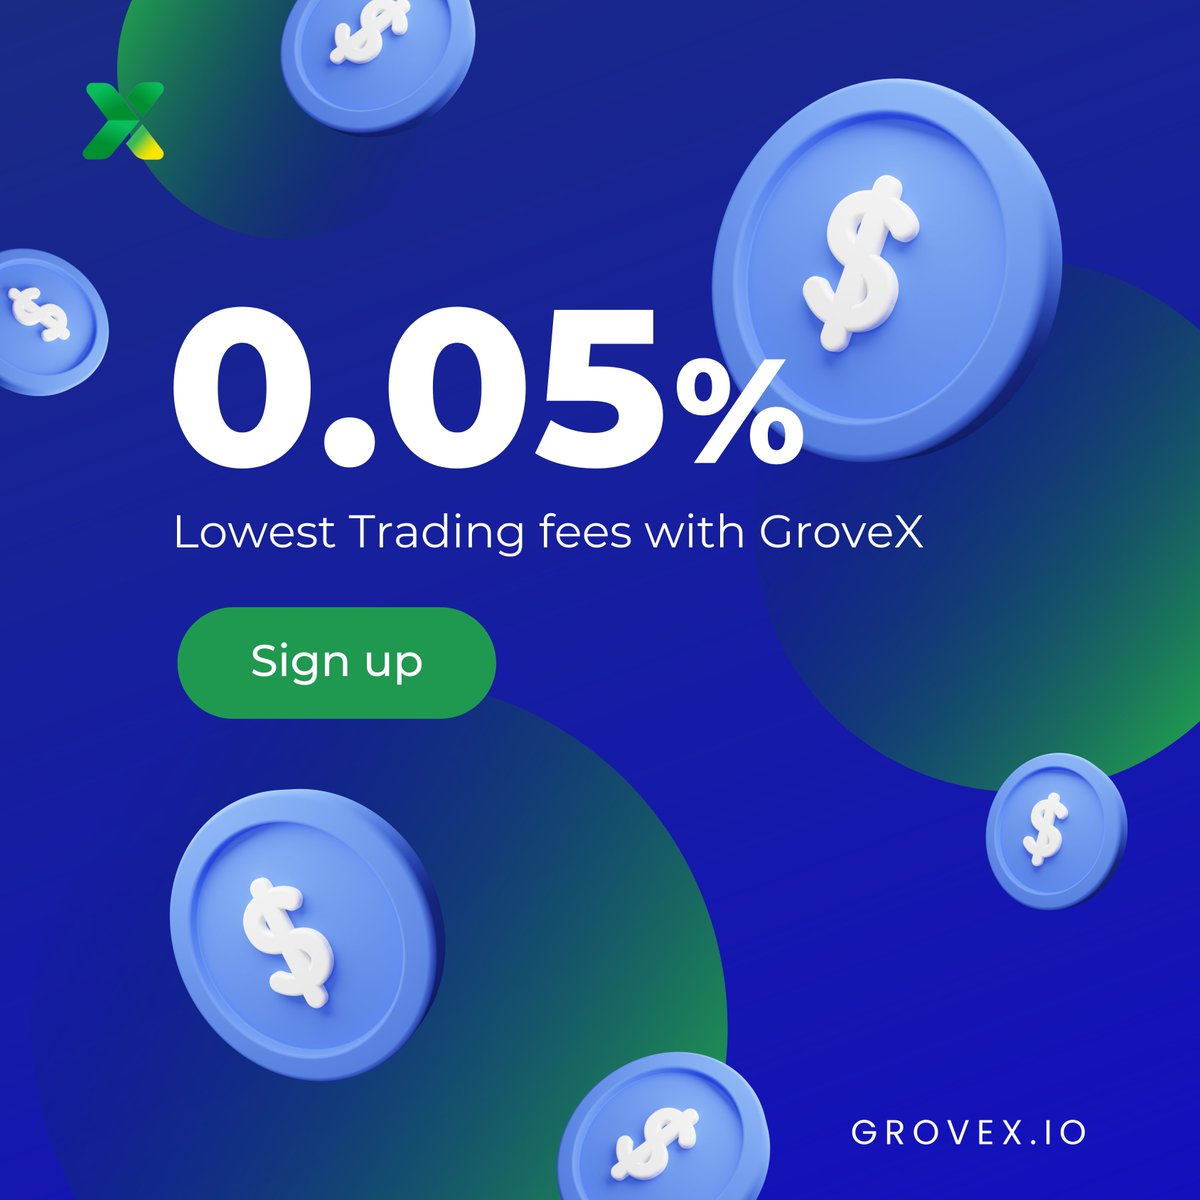 Trade more, pay less! 
Enjoy the lowest trading fees at just 0.05% on GroveX. Start trading today and maximize your crypto gains! 💰

#LowFees #GroveXTrading #CryptoPortfolio #Diversify #ListOnGroveX #GroveX #USDT #ETH #Crypto #Market #CryptoX #cryptocurrency #BNB